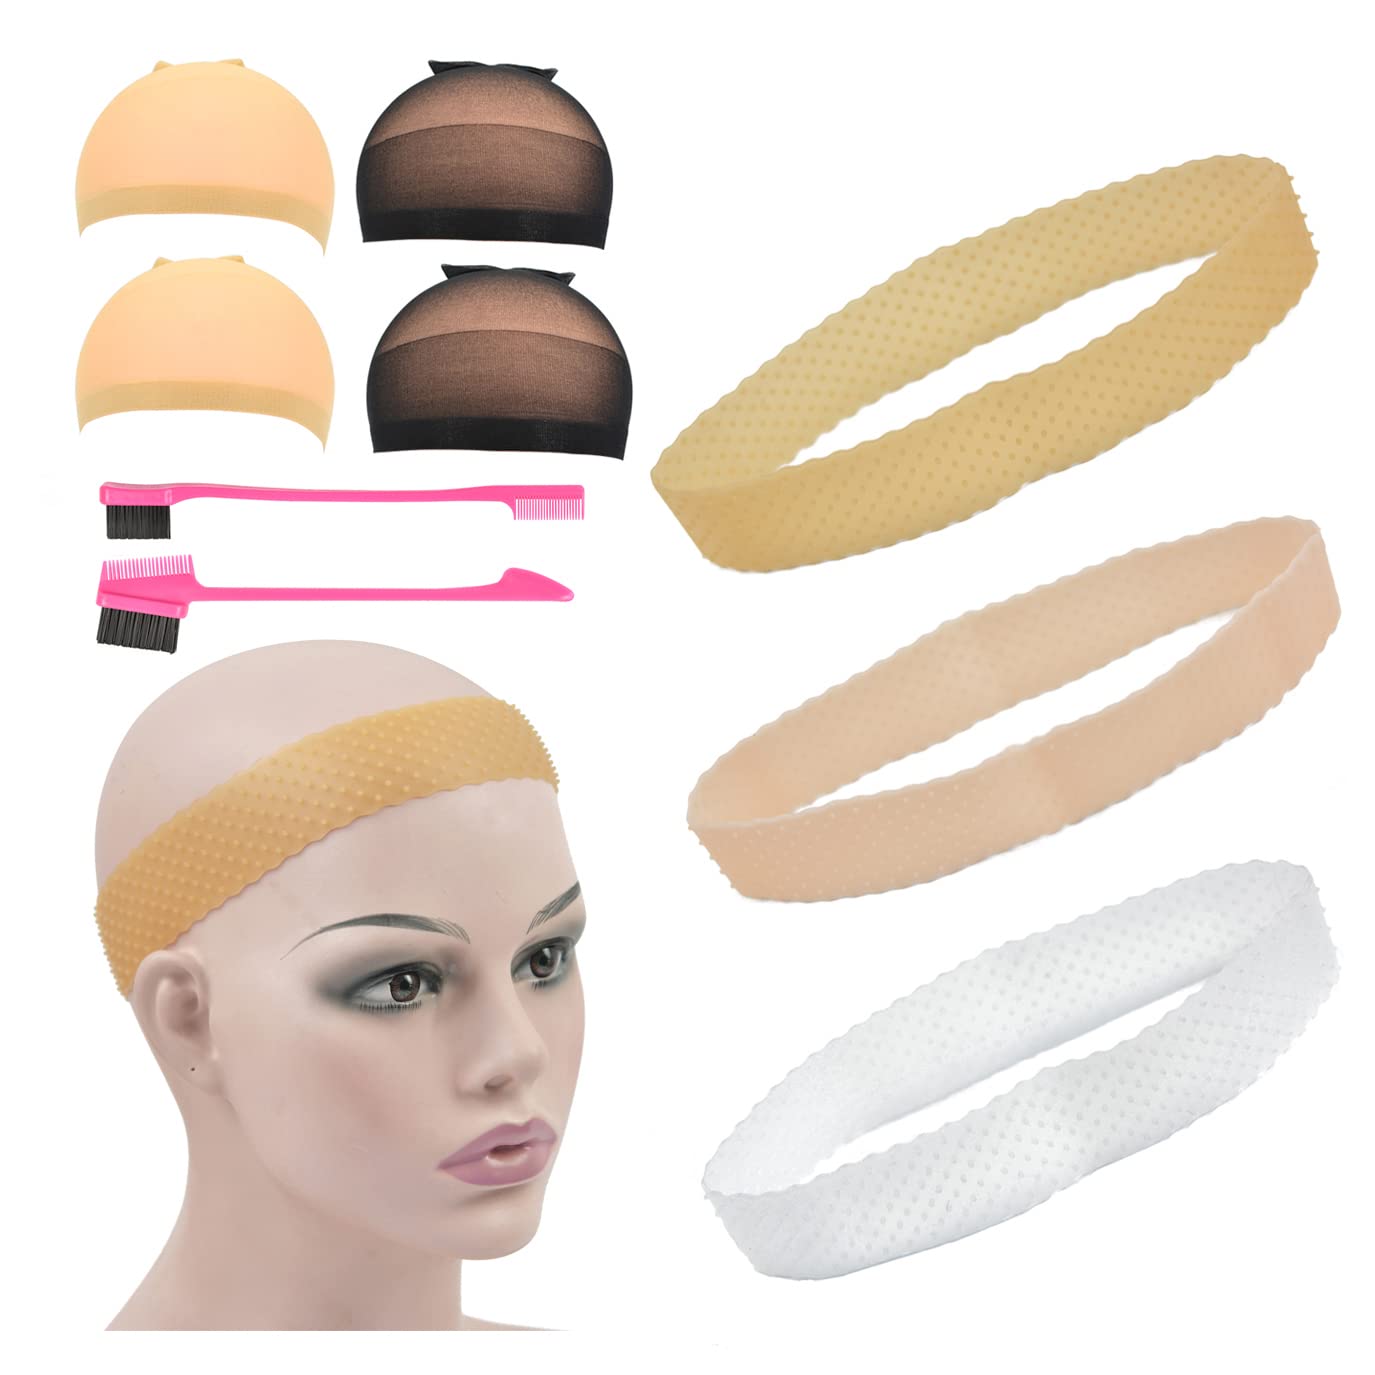 YTBYT 3 Pcs Silicone Wig Grip Band Non-Slip Elastic Headbands 4 Pcs Wig  Stocking Caps and 2 Pcs Hairbrush for Hold Wig (Mixing)